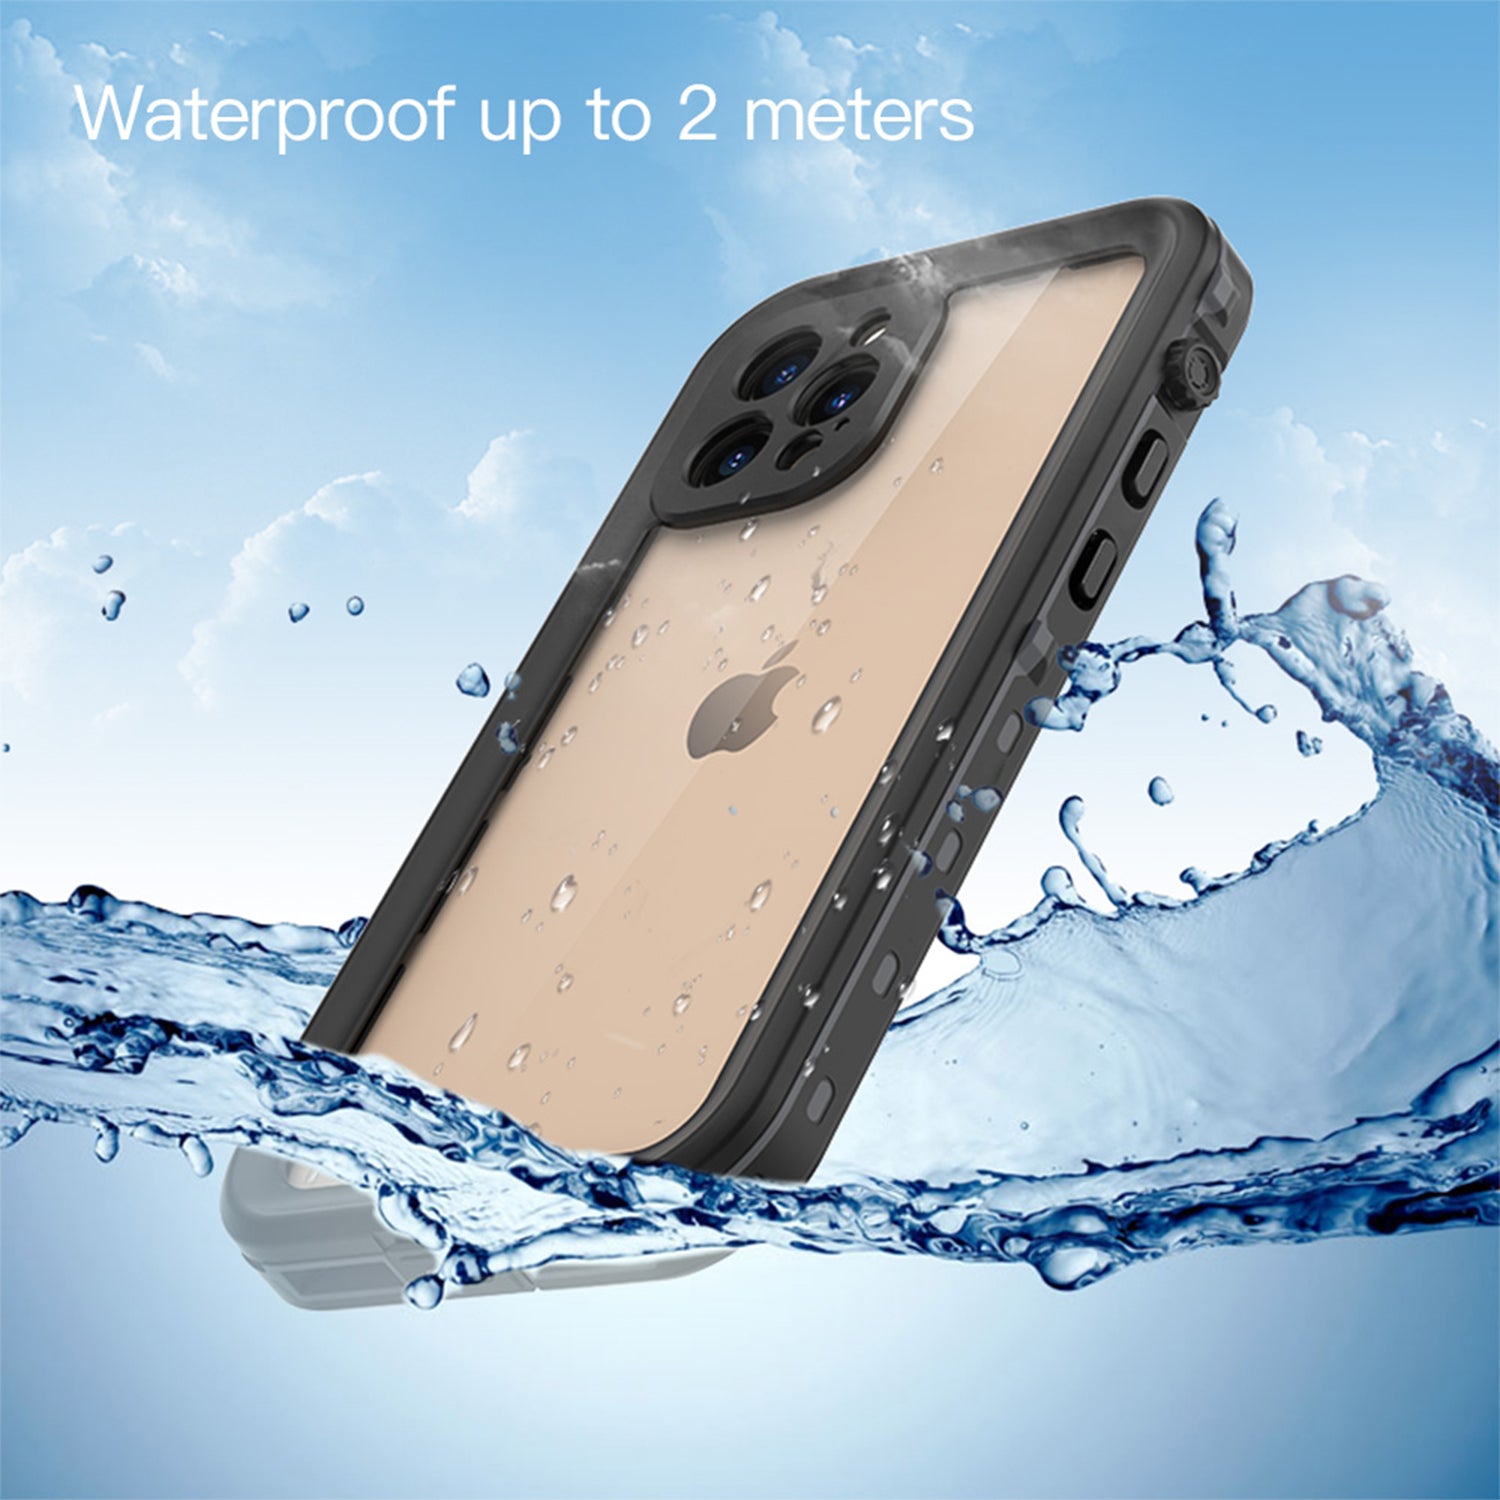 Apple iPhone 12 Pro Max (6.7") 360 Full Protective Waterproof Case with Built-in Screen Fingerprint Protector